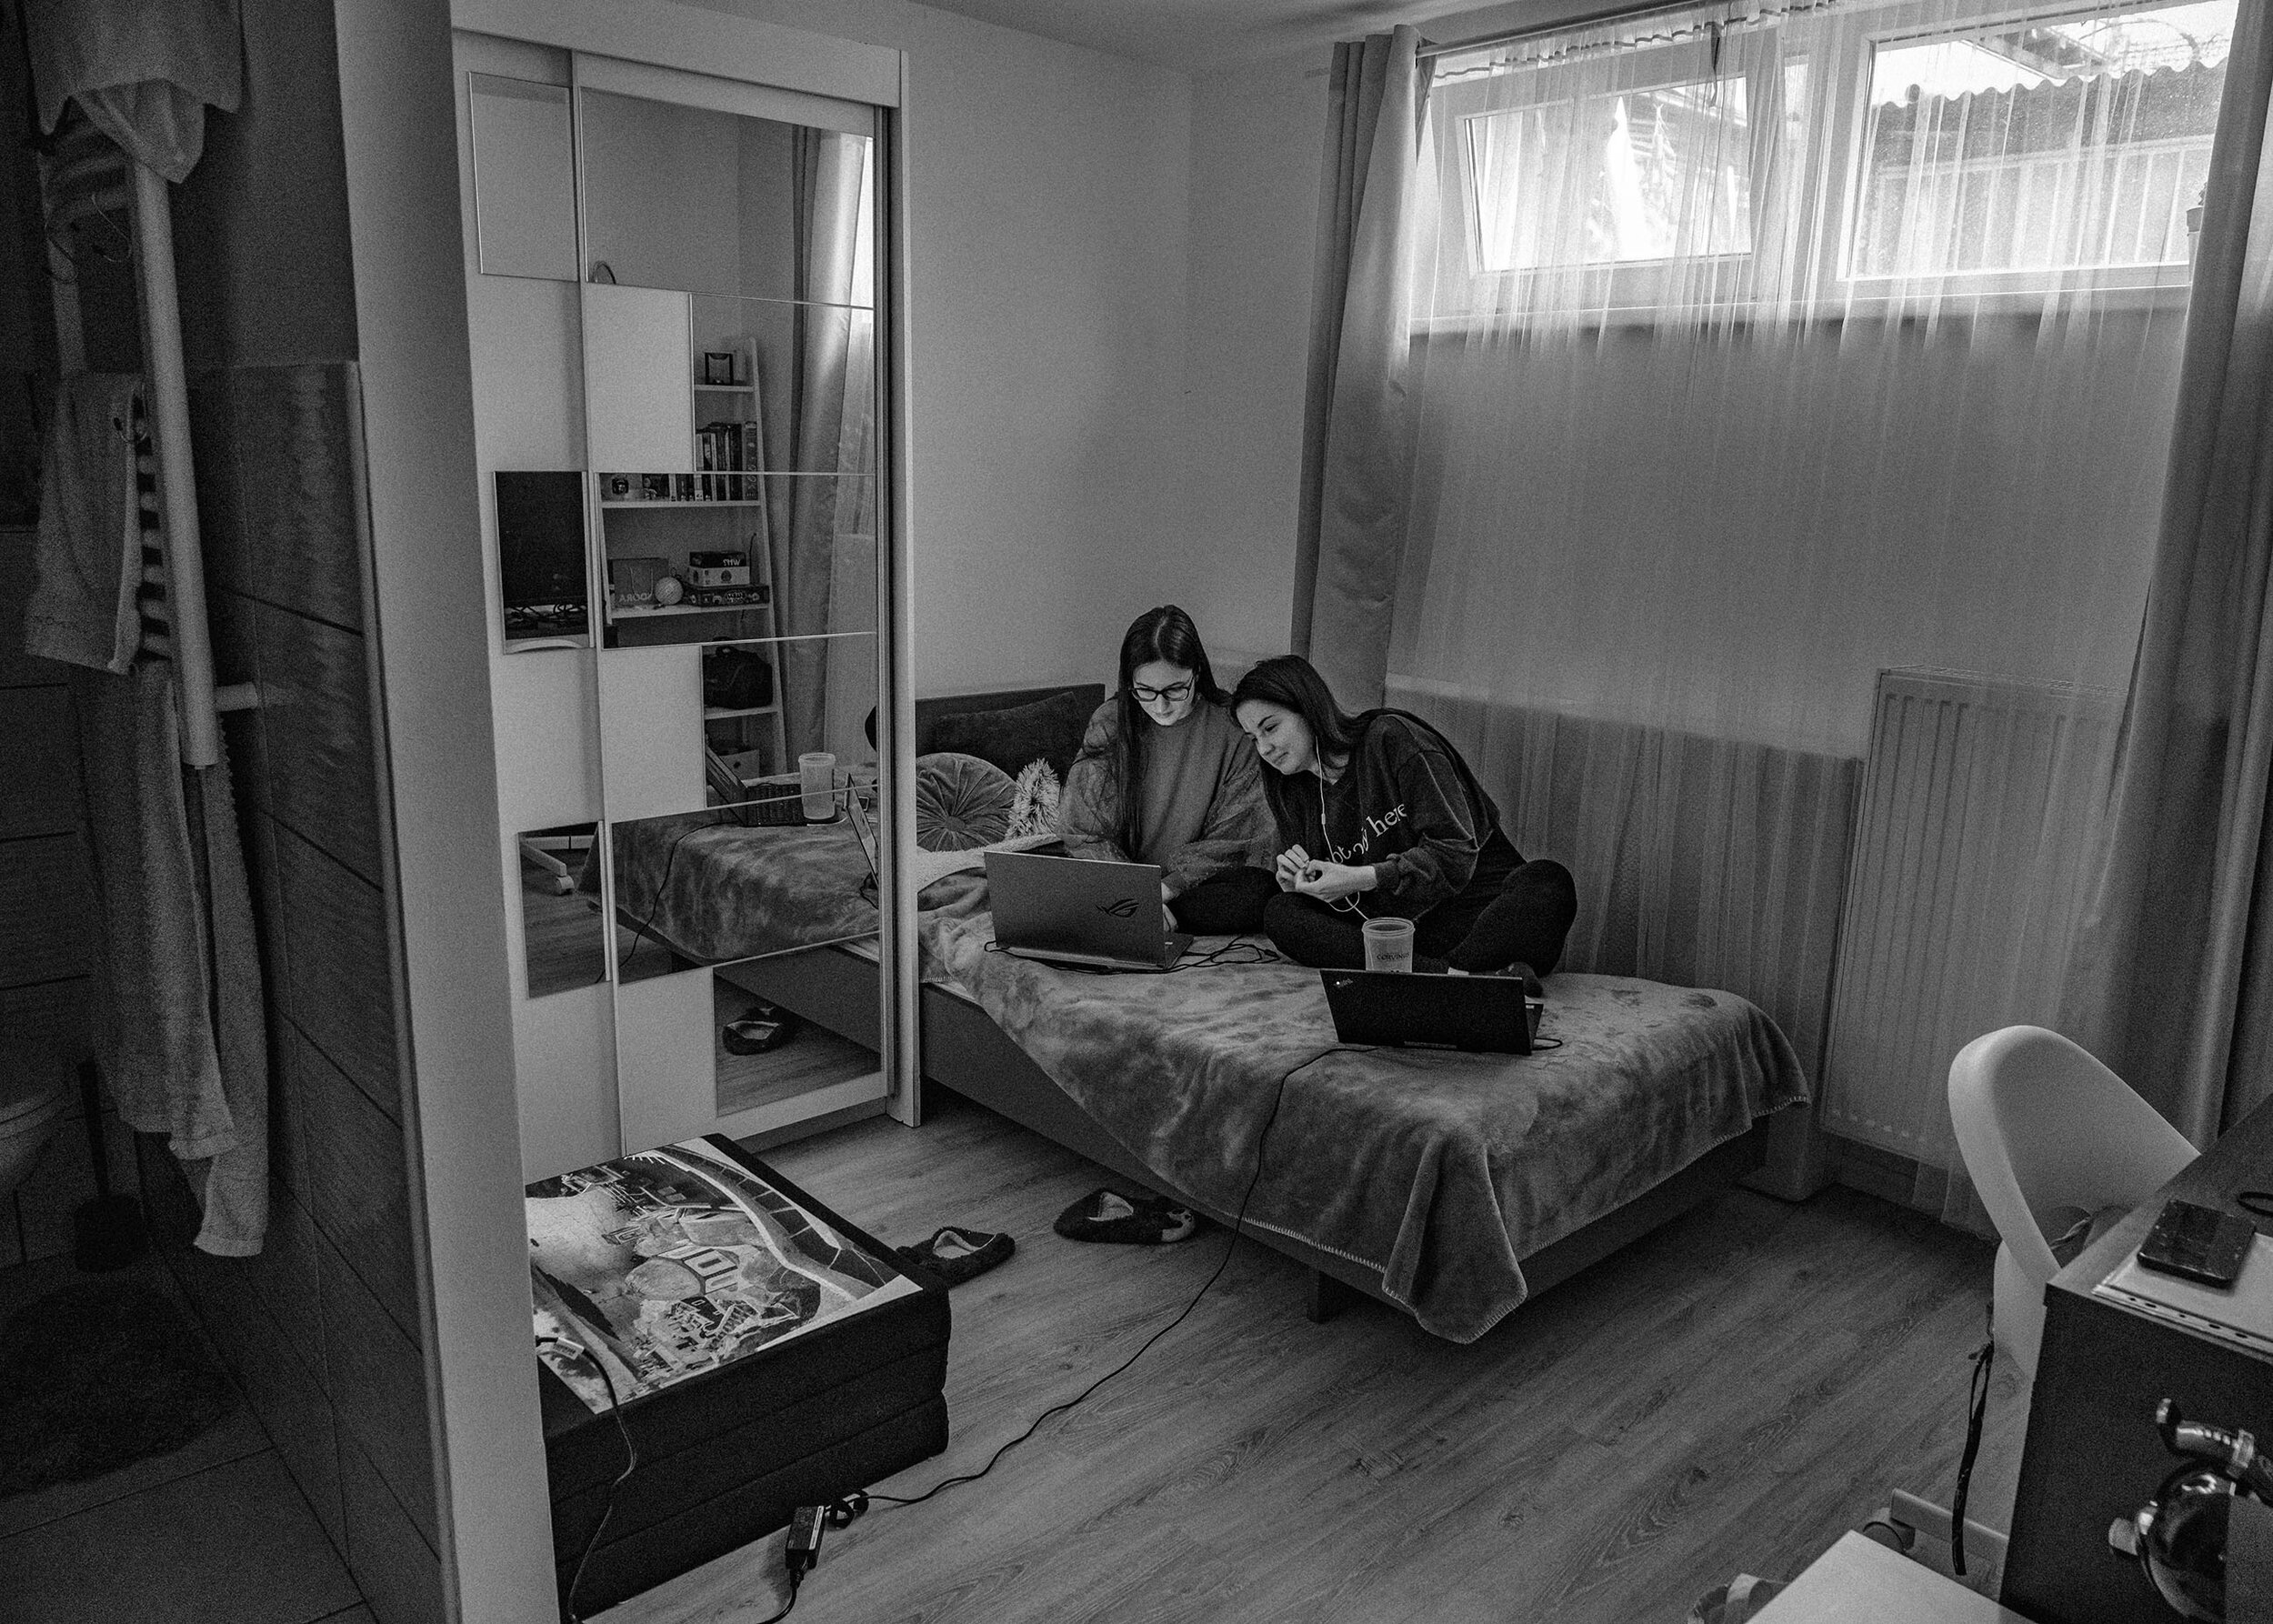  University classmates  Bogi  and  Nia  in Nia’s room in Budapest. Both of them stayed in college until March 2020, when the government started to empty all the student dorms country wide because of the emergency. Students were forced to move home or